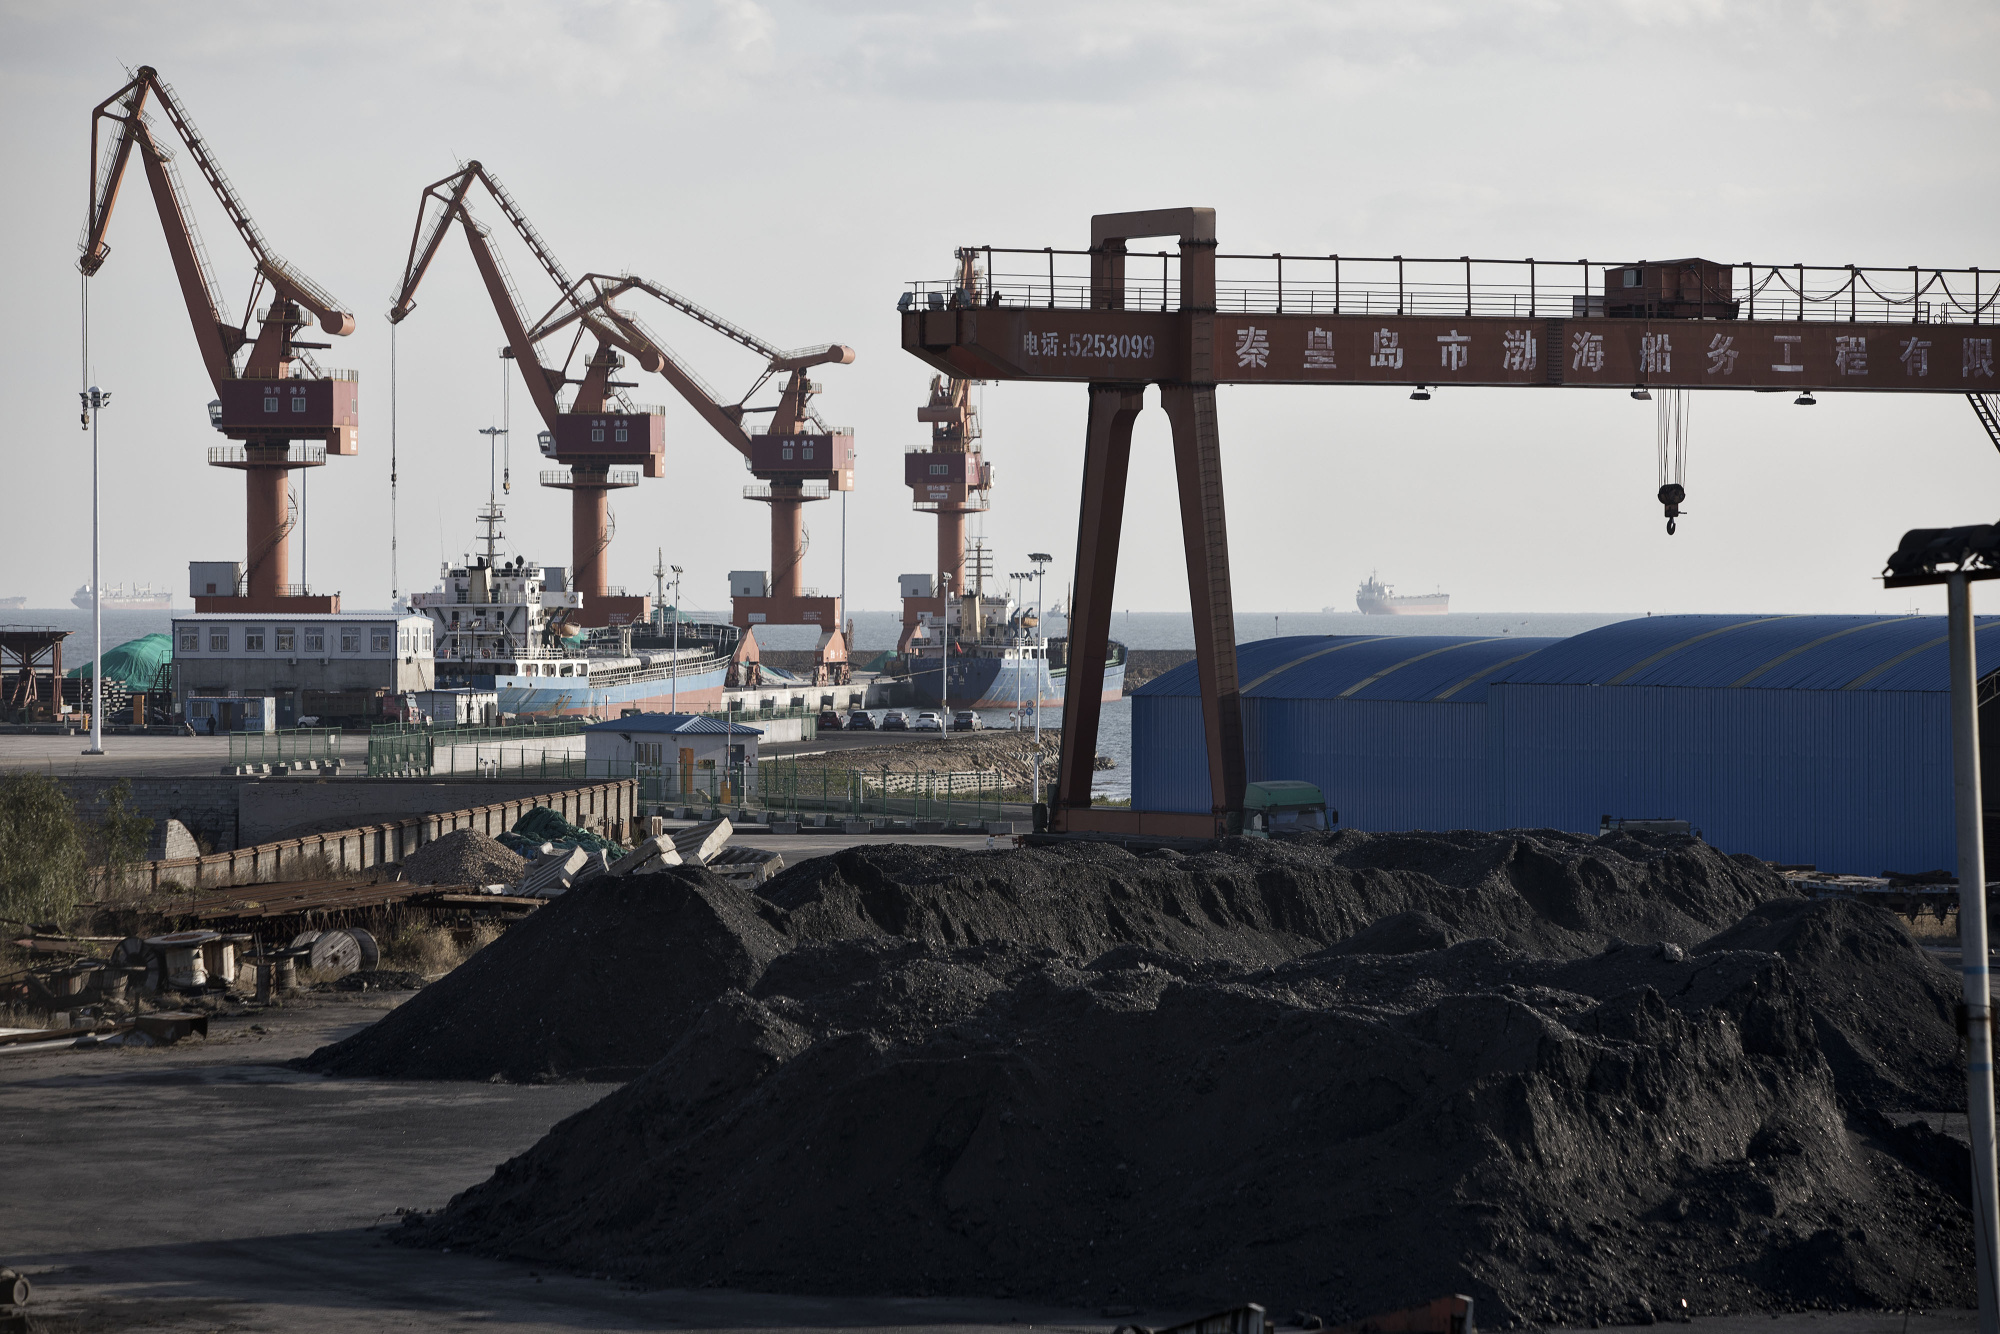 Piles of coal sit near port facilities as gantry cranes stand in the background at the Qinhuangdao Port in Qinhuangdao, China.